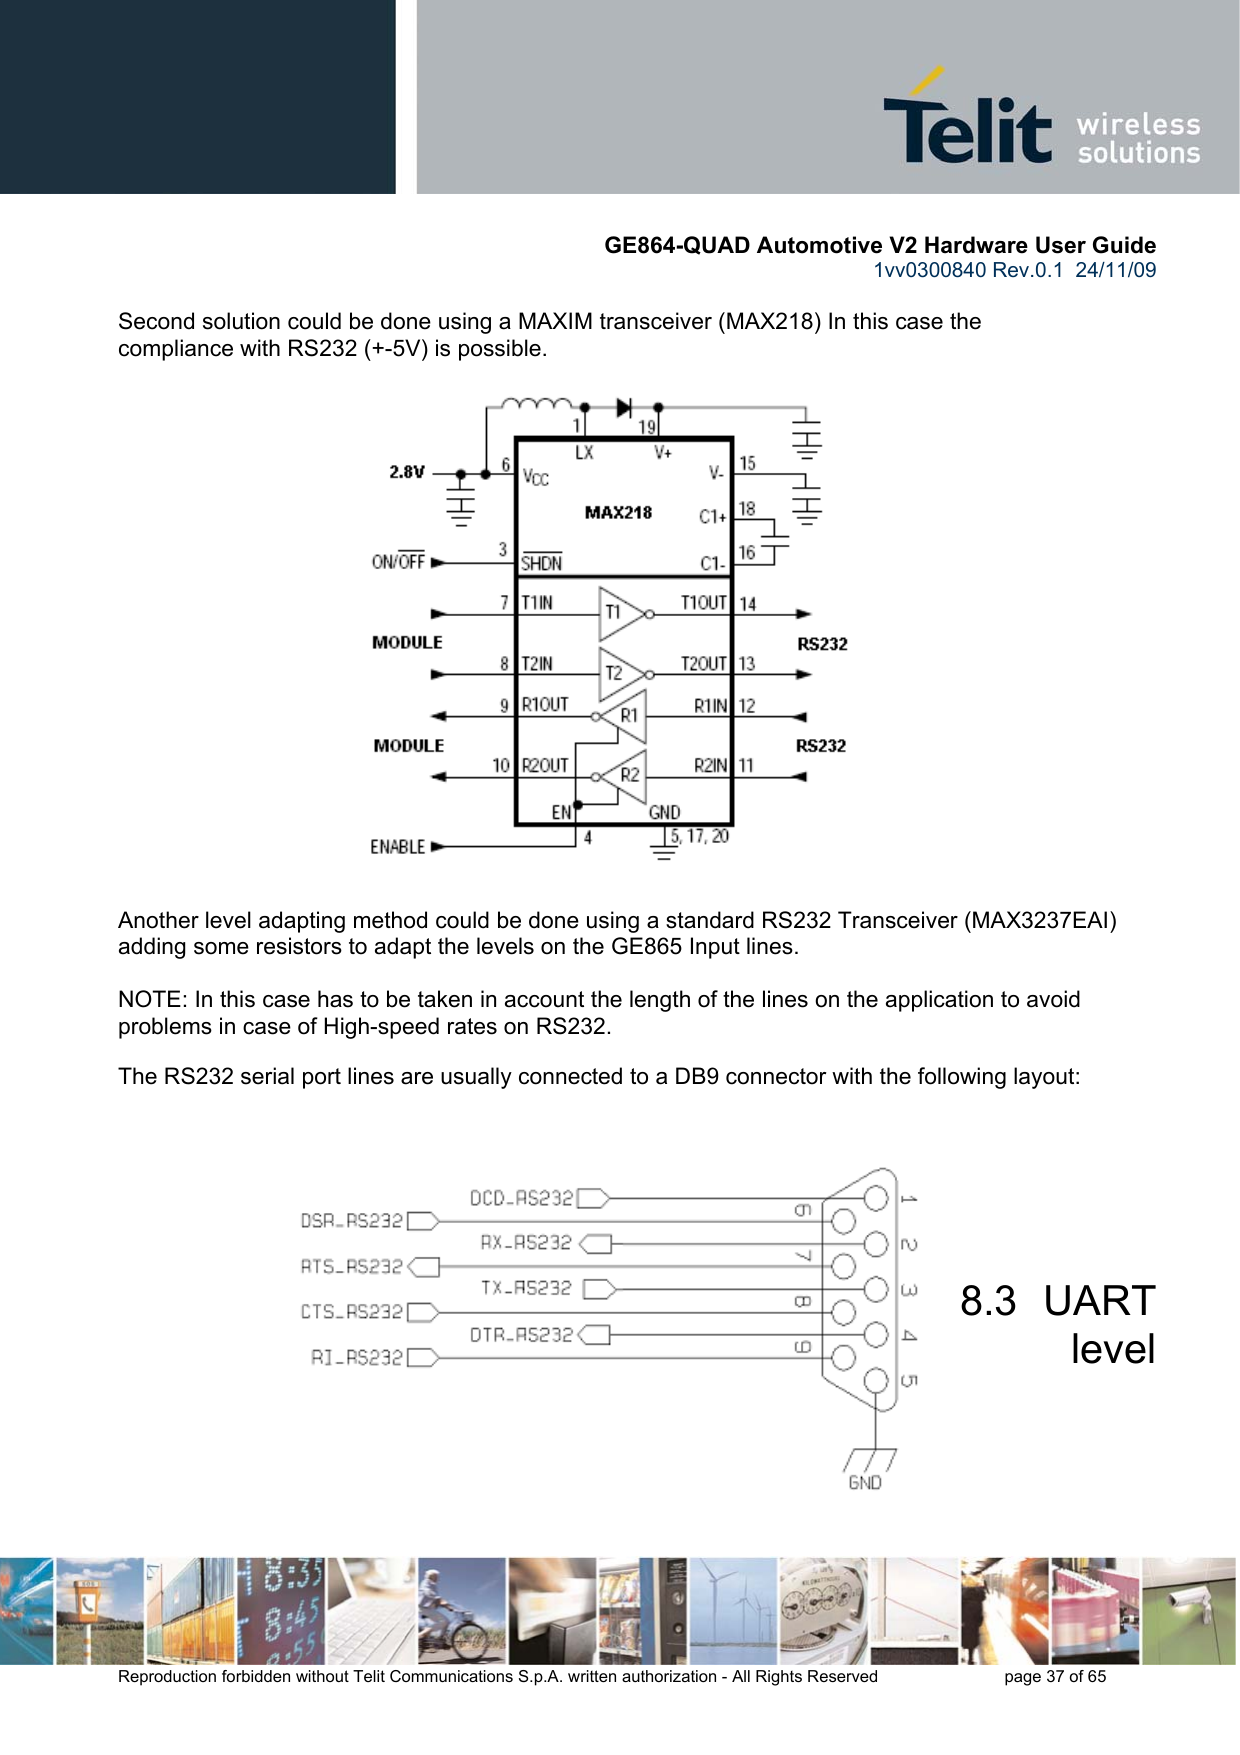       GE864-QUAD Automotive V2 Hardware User Guide 1vv0300840 Rev.0.1  24/11/09      Reproduction forbidden without Telit Communications S.p.A. written authorization - All Rights Reserved    page 37 of 65   Second solution could be done using a MAXIM transceiver (MAX218) In this case the compliance with RS232 (+-5V) is possible.                      Another level adapting method could be done using a standard RS232 Transceiver (MAX3237EAI) adding some resistors to adapt the levels on the GE865 Input lines.  NOTE: In this case has to be taken in account the length of the lines on the application to avoid problems in case of High-speed rates on RS232.  The RS232 serial port lines are usually connected to a DB9 connector with the following layout:     8.3  UART level 